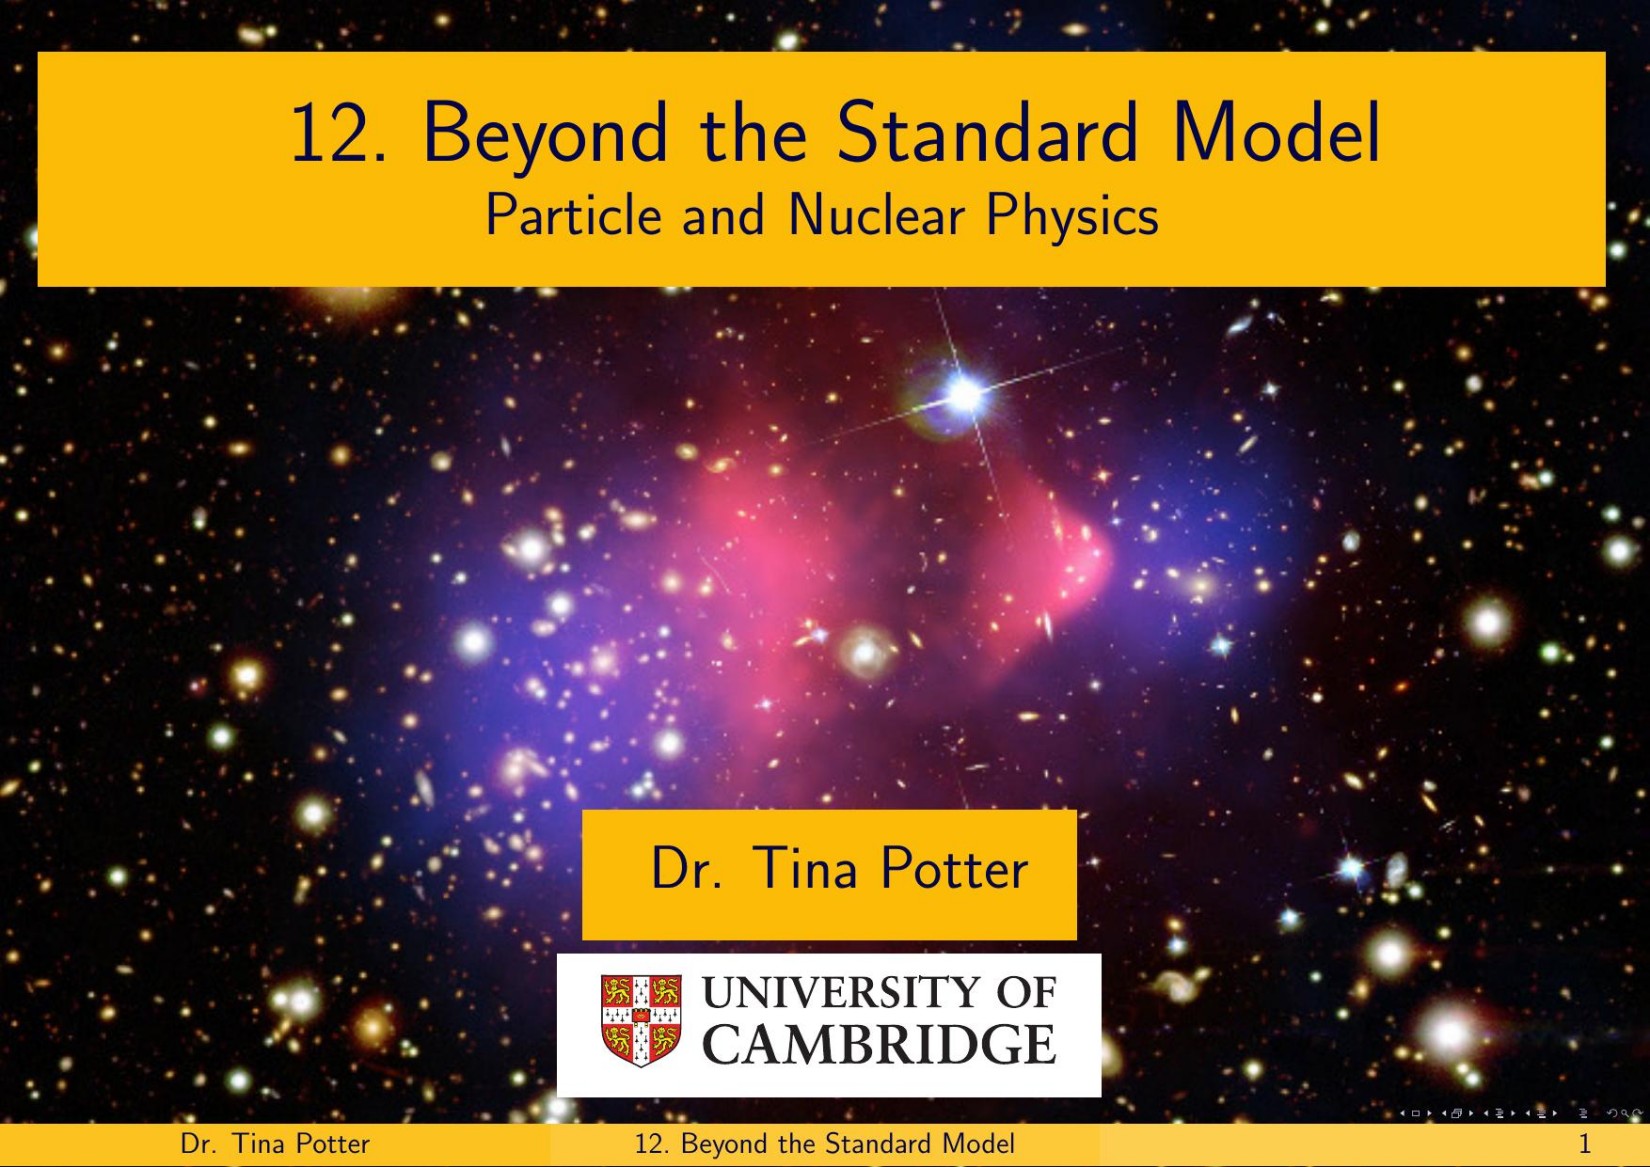 12. Beyond the Standard Model - Particle and Nuclear Physics